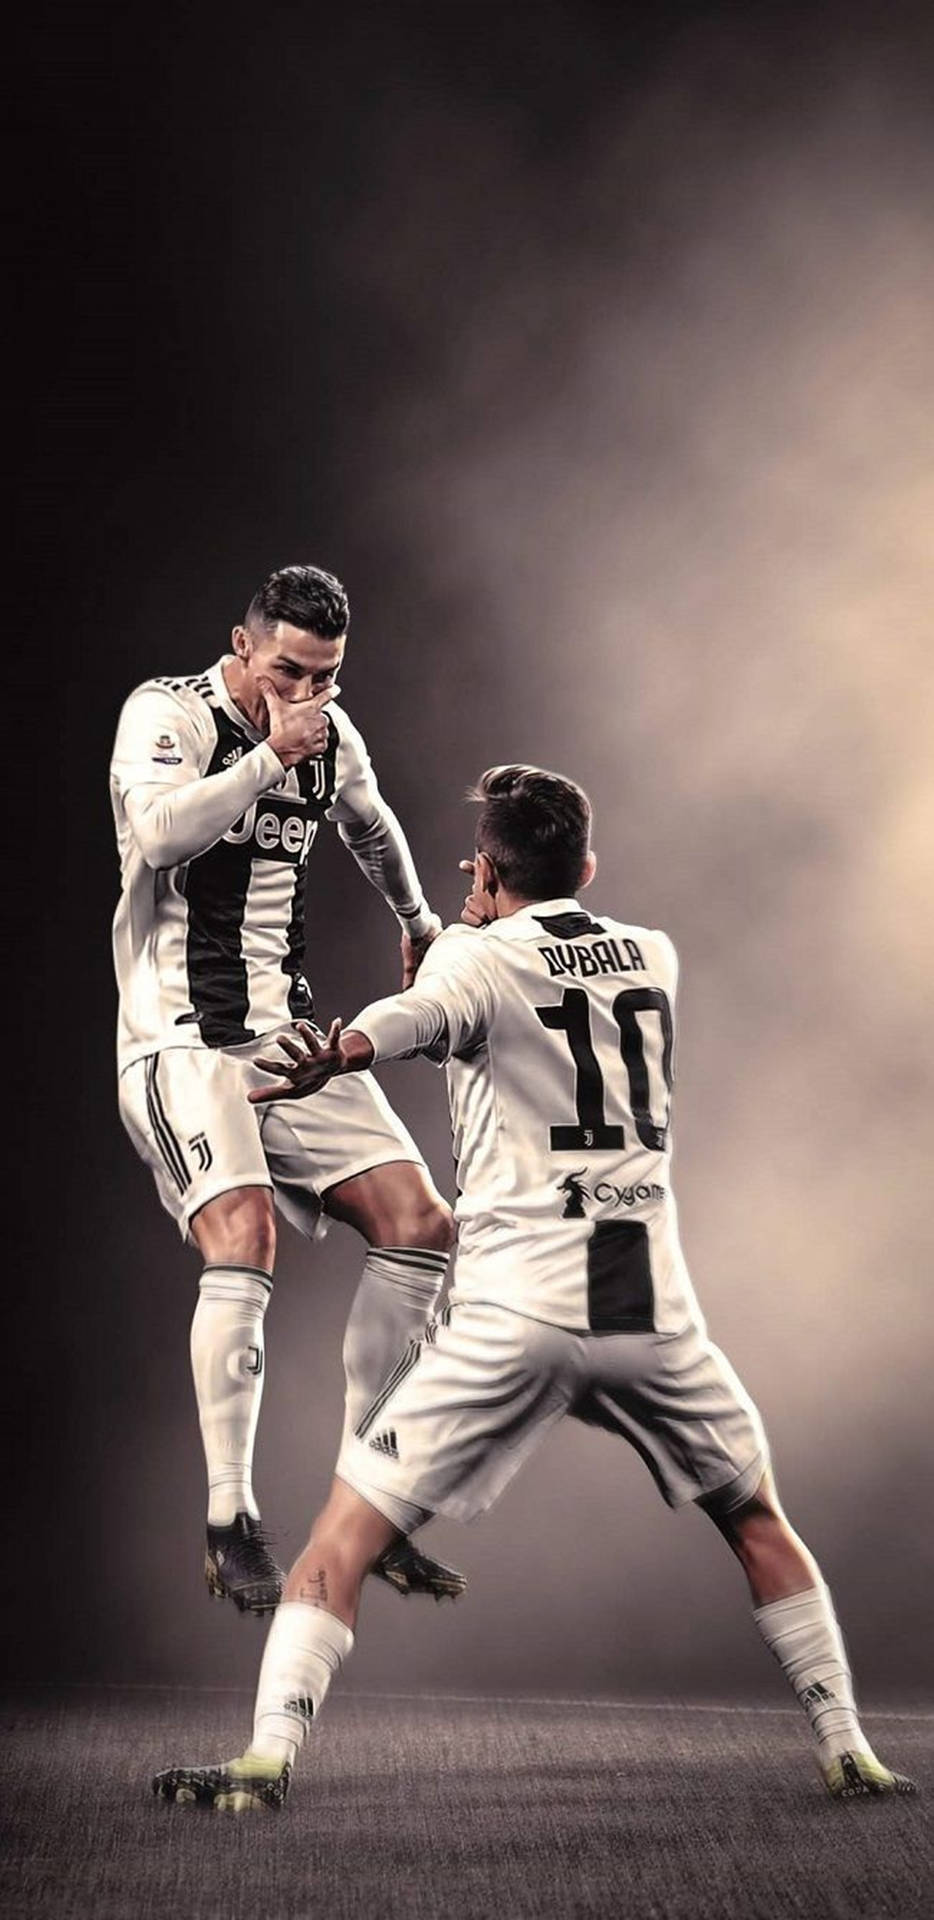 udføre labyrint mølle Download Juventus Cristiano Ronaldo And Paulo Dybala Mask Pose Wallpaper |  Wallpapers.com